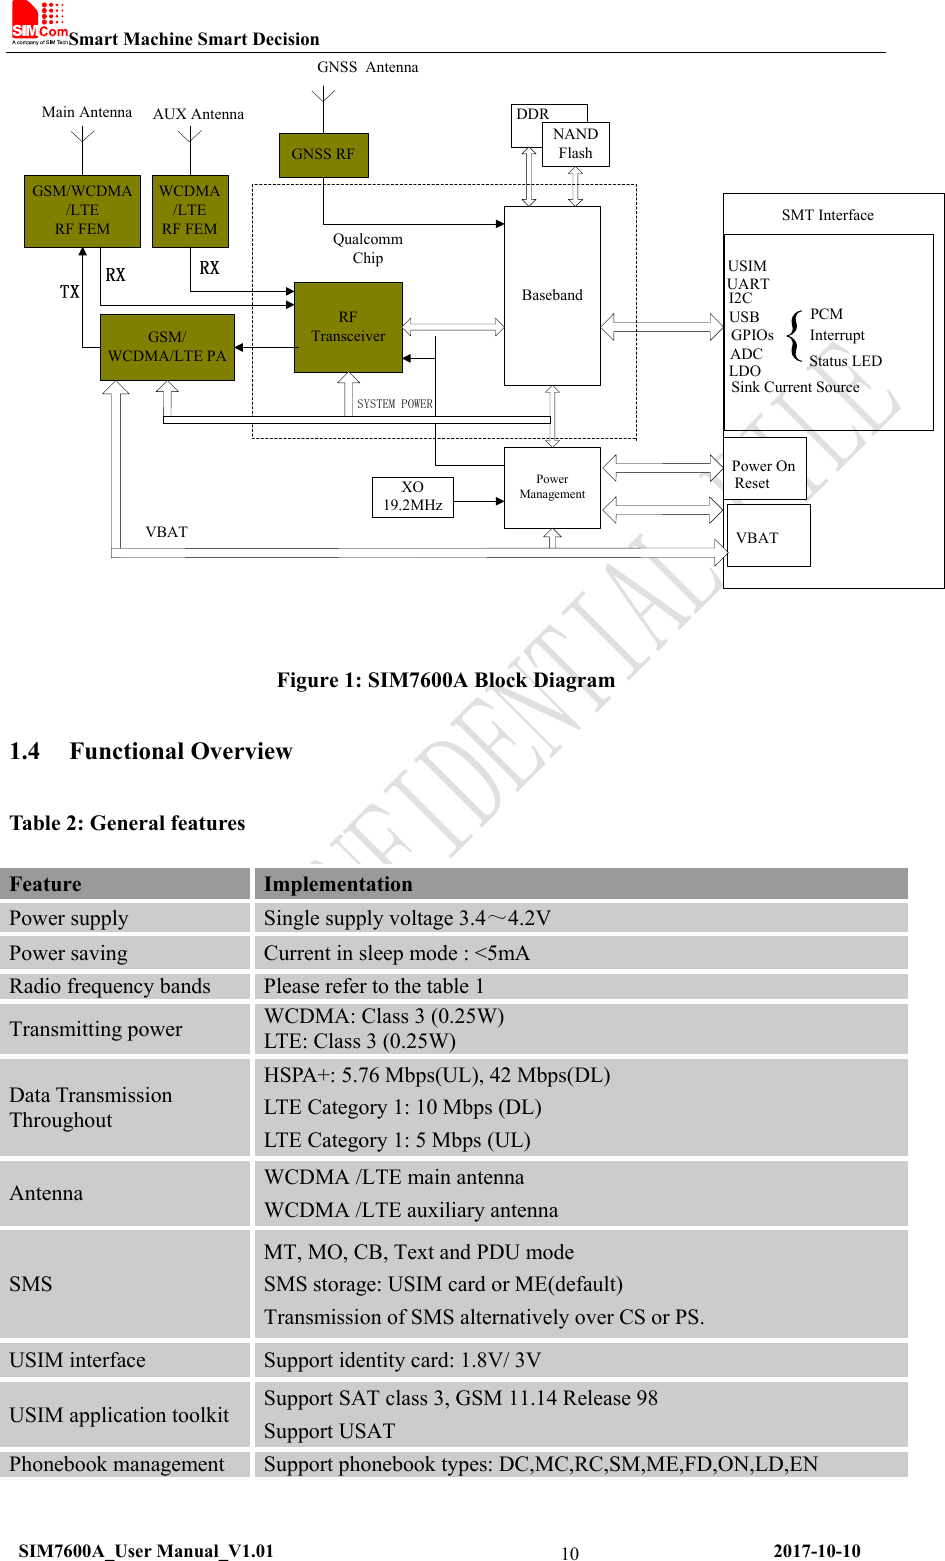 Smart Machine Smart Decision  SIM7600A_User Manual_V1.01                                                     2017-10-10 10GSM/WCDMA/LTERF FEMGSM/ WCDMA/LTE PARF TransceiverBasebandXO19.2MHzNANDFlashI2CPCMInterruptStatus LEDUSBUSIMPower OnResetUARTGPIOsADCLDOVBATSink Current SourceDDRMain AntennaPowerManagementQualcomm ChipSMT InterfaceWCDMA/LTERF FEMAUX AntennaSYSTEM POWERVBATGNSS RFGNSS Antenna Figure 1: SIM7600A Block Diagram 1.4 Functional Overview Table 2: General features Feature  Implementation Power supply  Single supply voltage 3.4～4.2V Power saving  Current in sleep mode : &lt;5mA Radio frequency bands  Please refer to the table 1 Transmitting power  WCDMA: Class 3 (0.25W) LTE: Class 3 (0.25W)   Data Transmission Throughout HSPA+: 5.76 Mbps(UL), 42 Mbps(DL) LTE Category 1: 10 Mbps (DL)   LTE Category 1: 5 Mbps (UL) Antenna  WCDMA /LTE main antenna WCDMA /LTE auxiliary antenna SMS MT, MO, CB, Text and PDU mode SMS storage: USIM card or ME(default) Transmission of SMS alternatively over CS or PS. USIM interface  Support identity card: 1.8V/ 3V USIM application toolkit  Support SAT class 3, GSM 11.14 Release 98 Support USAT Phonebook management  Support phonebook types: DC,MC,RC,SM,ME,FD,ON,LD,EN 